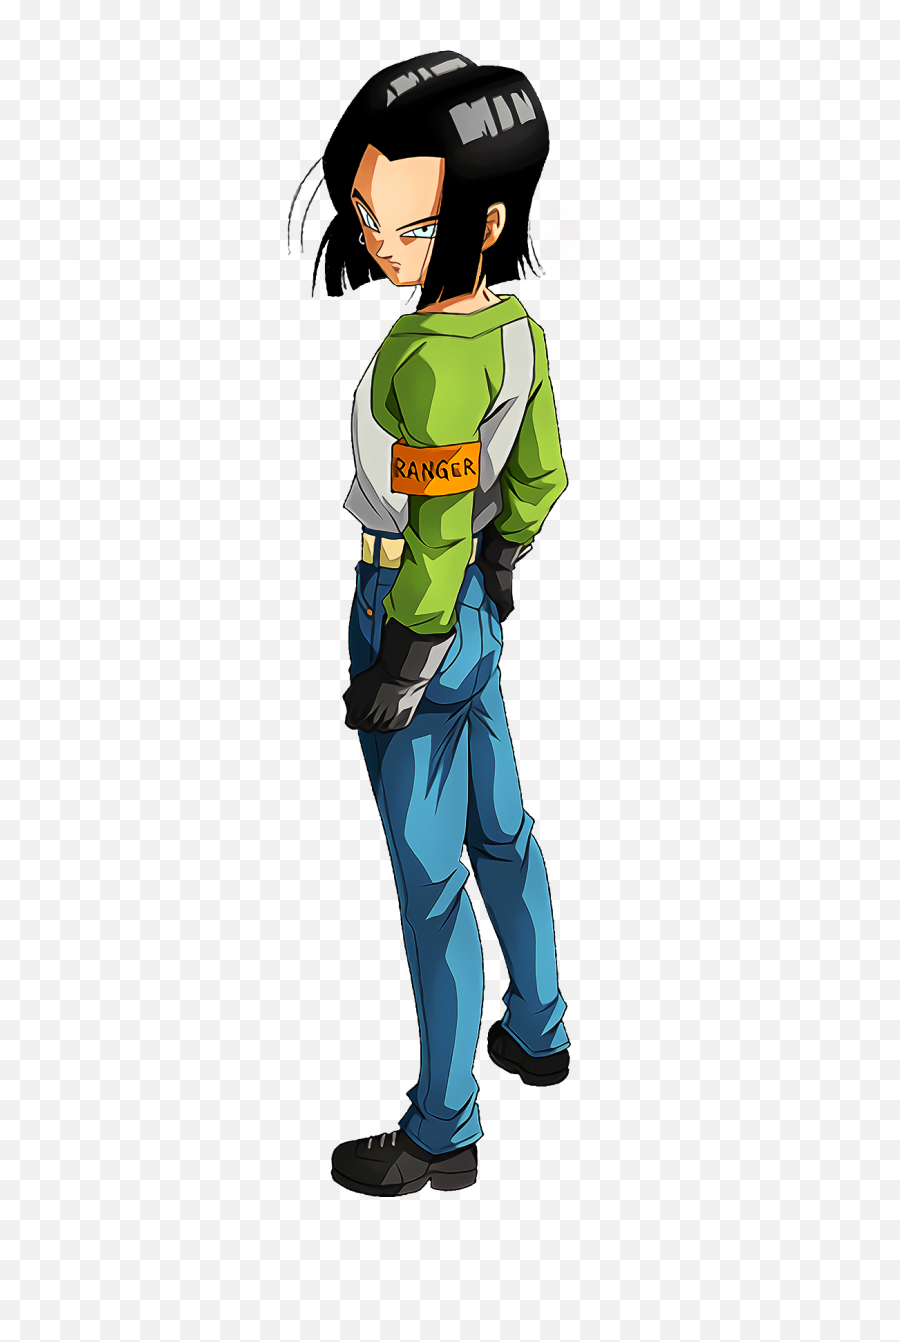 My Dream Android 17 Dbs Render - Fictional Character Emoji,Dragon Emoji Android